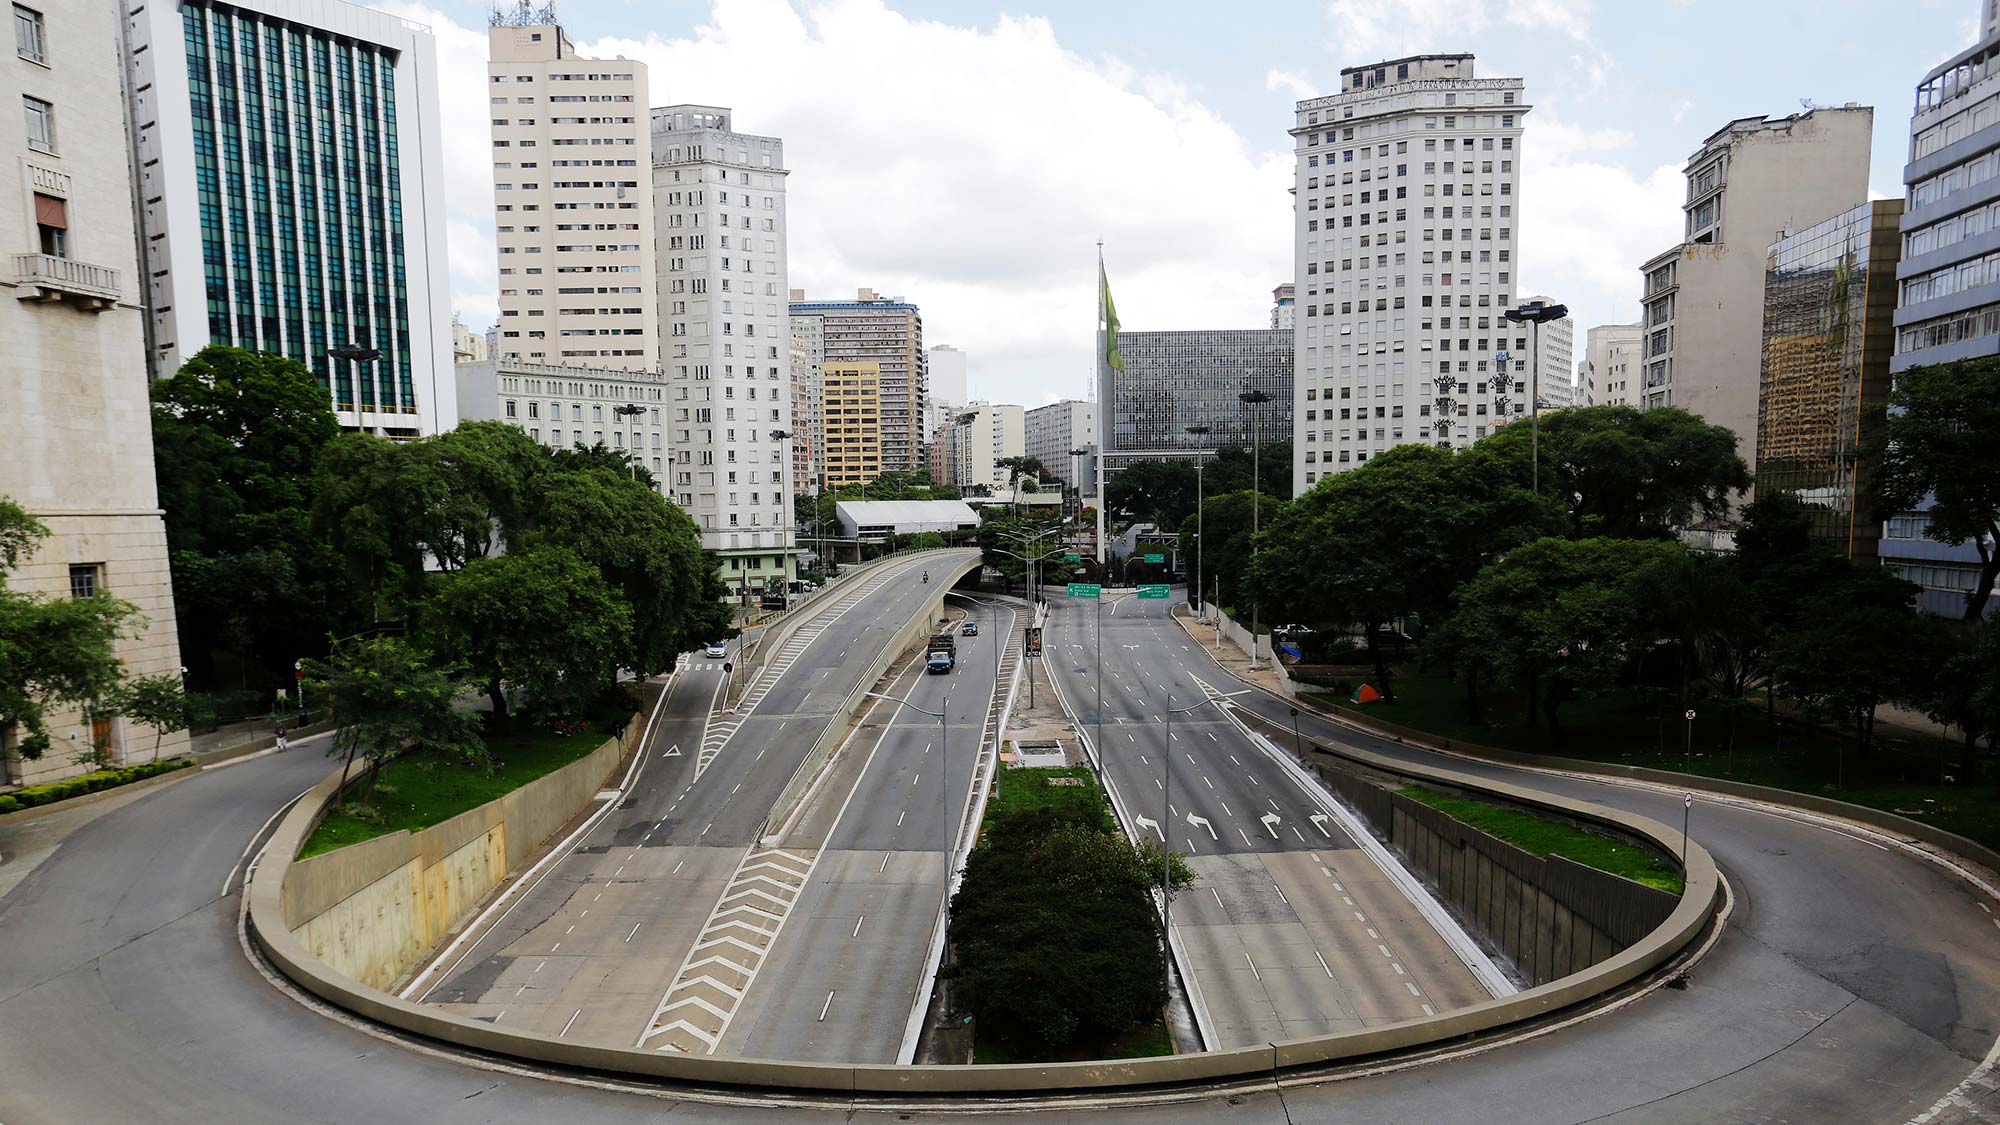 Streets of Sao Paolo deserted due to COVID-19